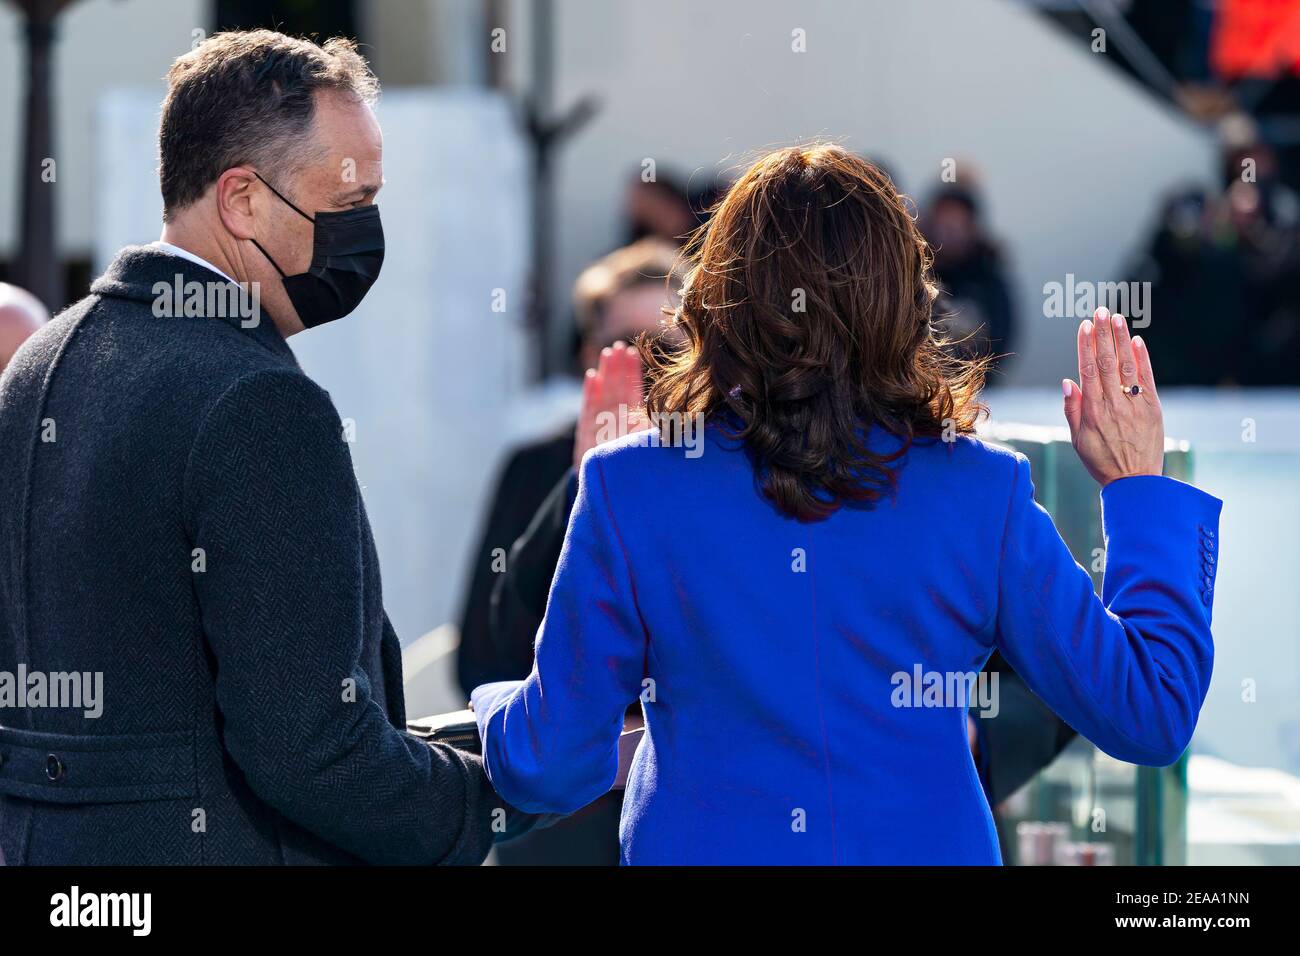 Vice President Kamala Harris, joined by her husband Mr. Doug Emhoff is sworn in as Vice President of the United States by Supreme Court Justice Sonia Sotomayor Wednesday, Jan. 20, 2021, at the U.S. Capitol in Washington, D.C. (Official White House Photo by Lawrence Jackson) Stock Photo